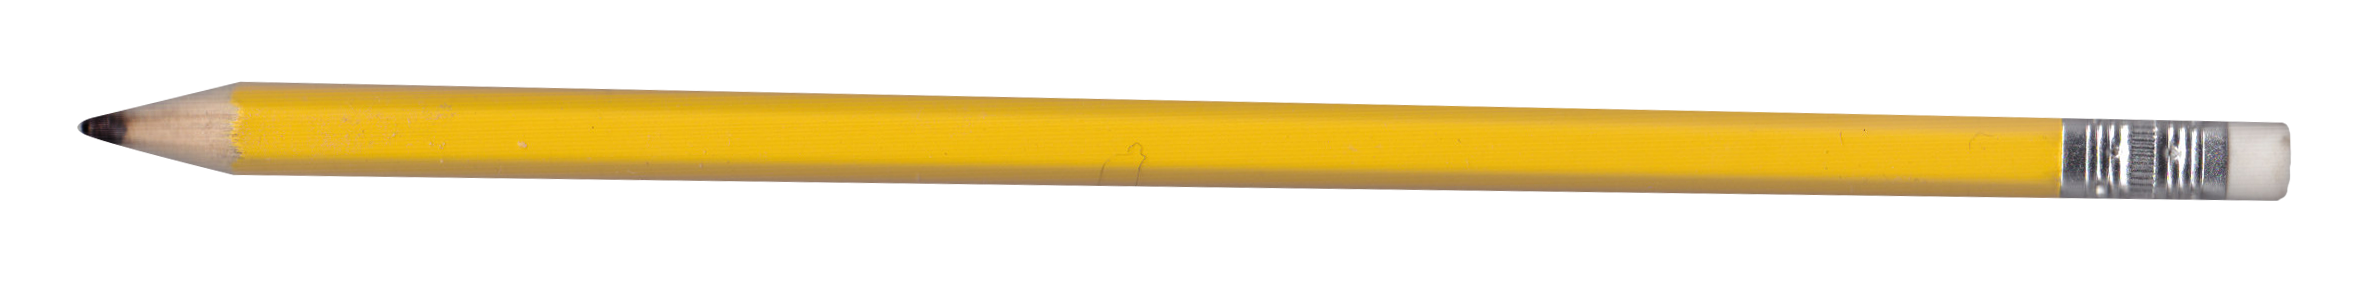 Yellow Pencil Transparent Background PNG Image